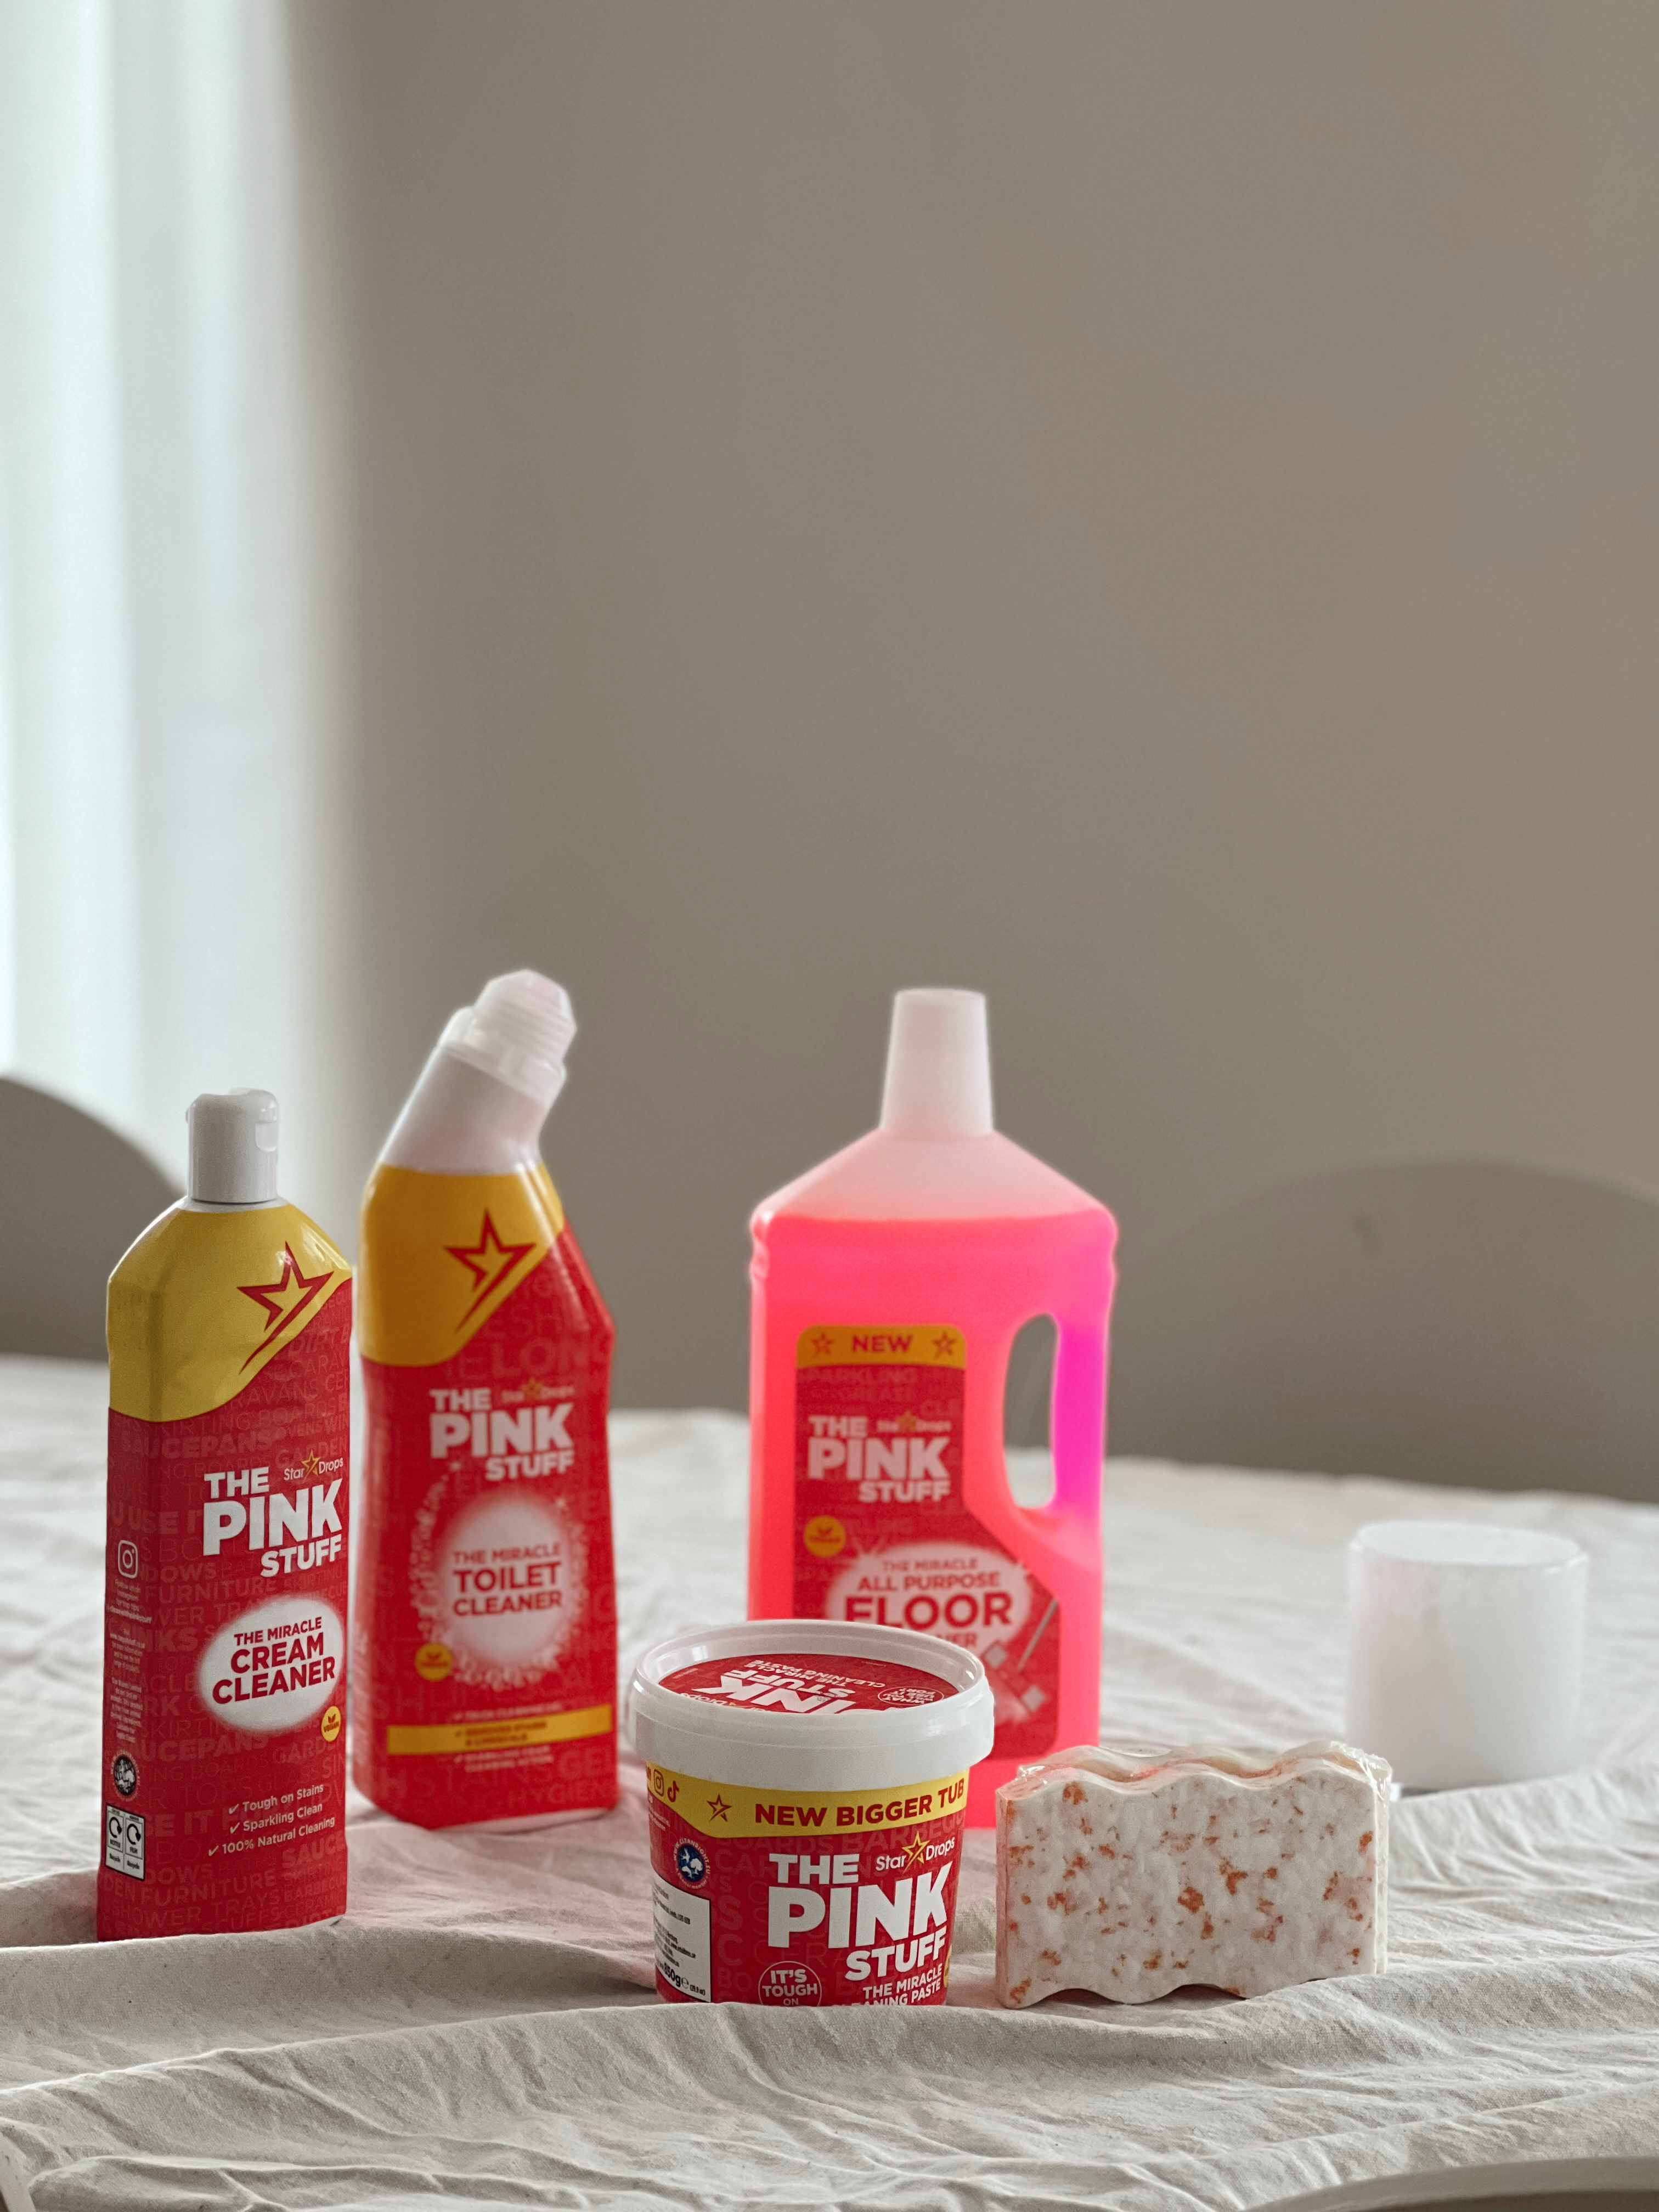 The Miracle All Purpose Floor Cleaner by THE PINK STUFF 